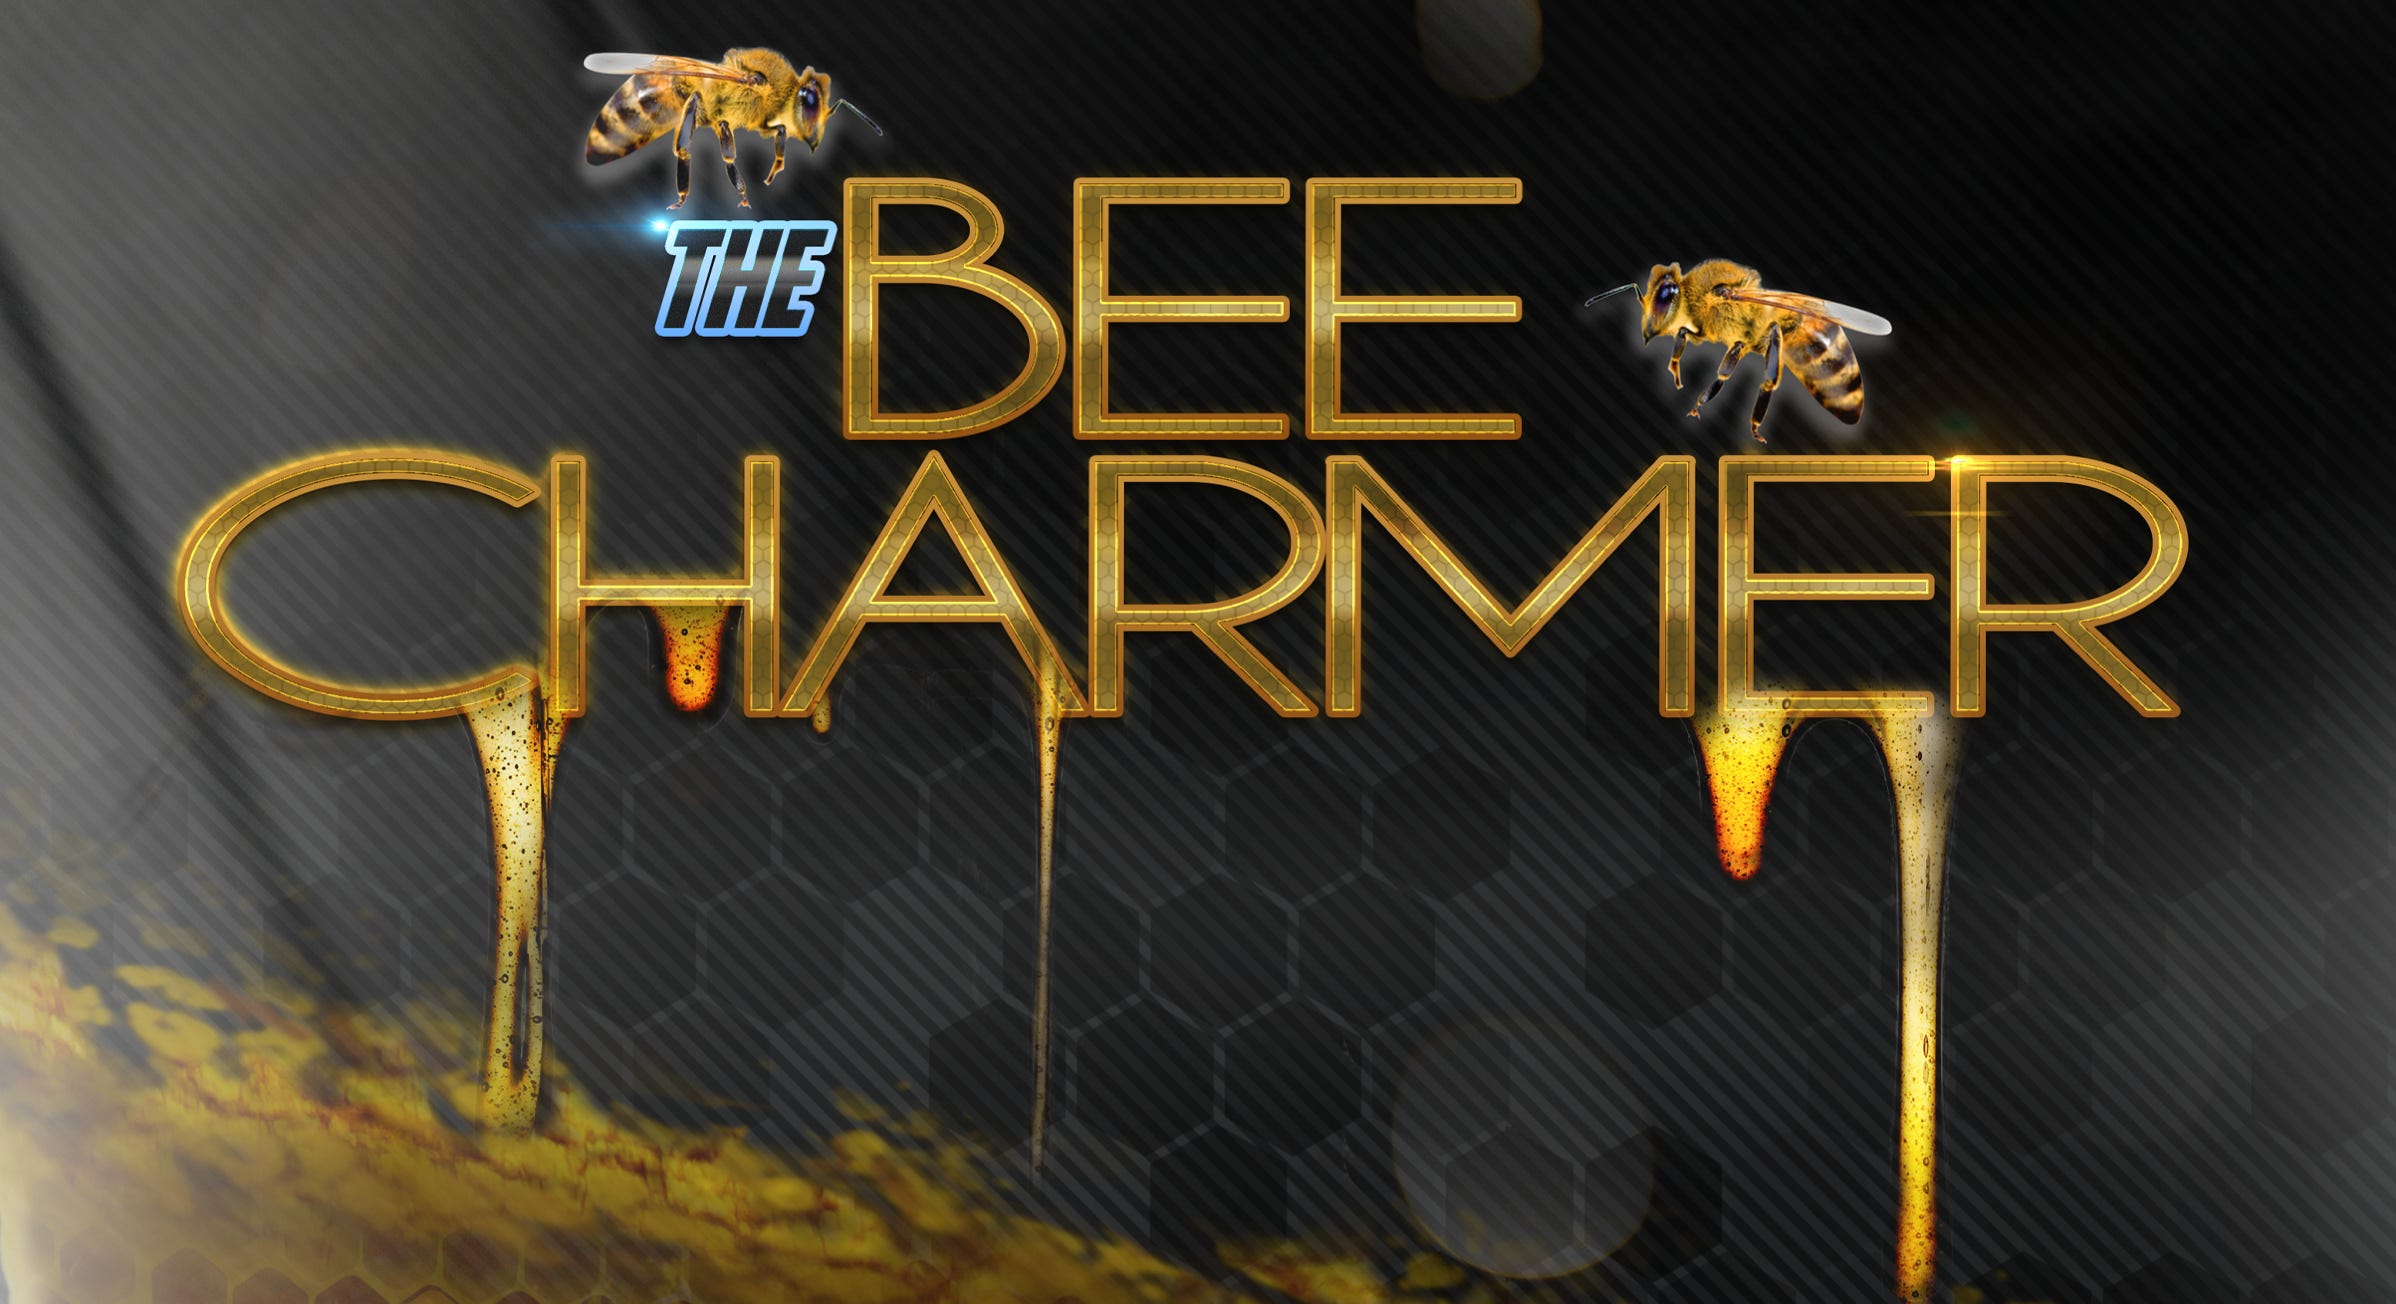 bee charmer brand, title card, graphic design, 2d, 3d motion graphics